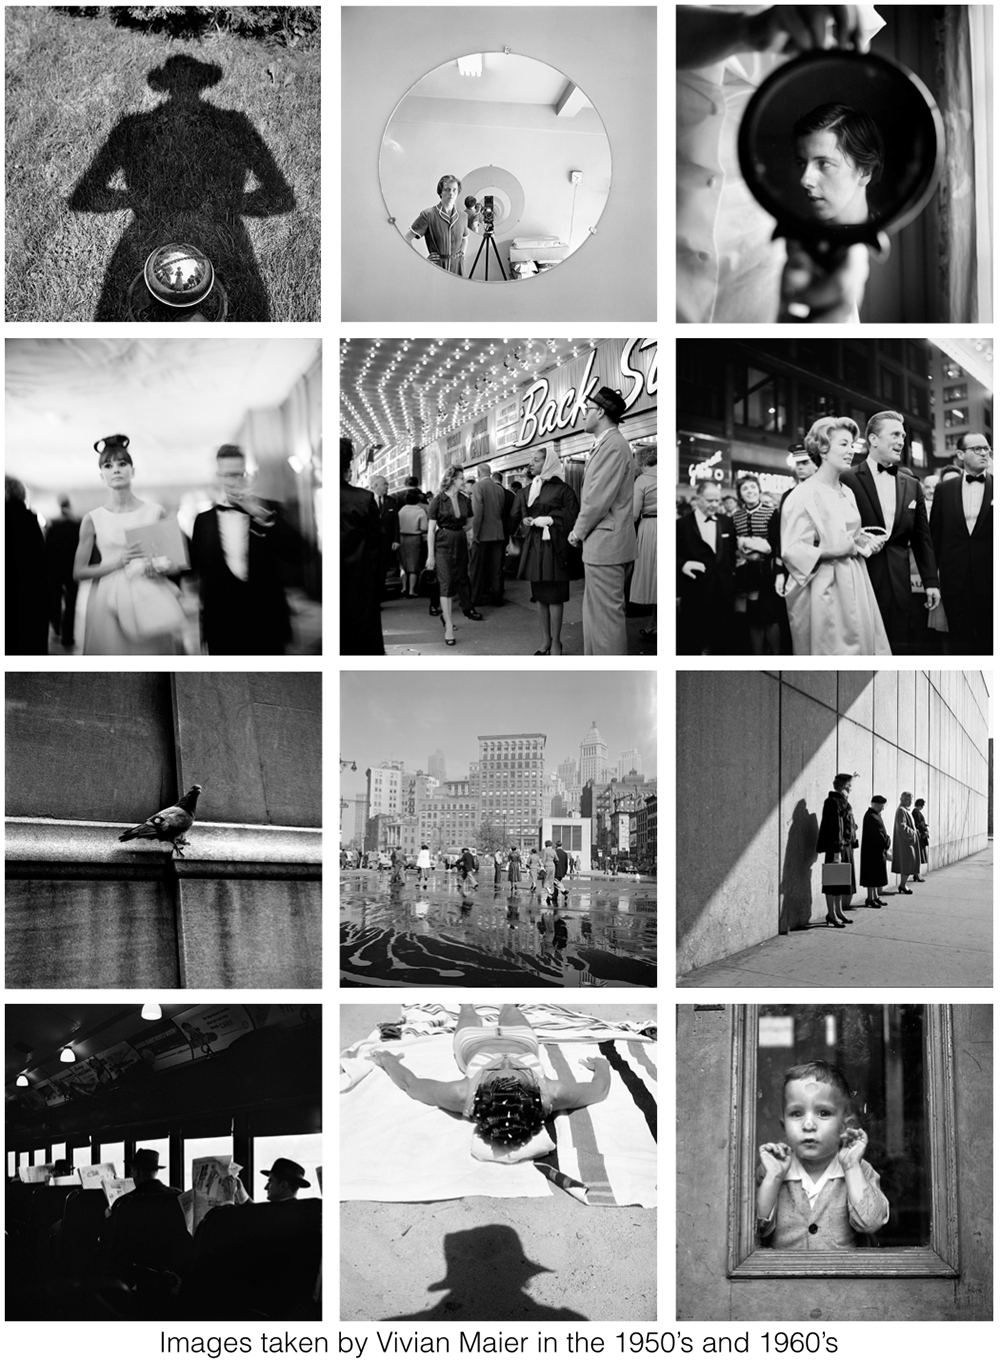 Vivian Maier images 50s and 60s